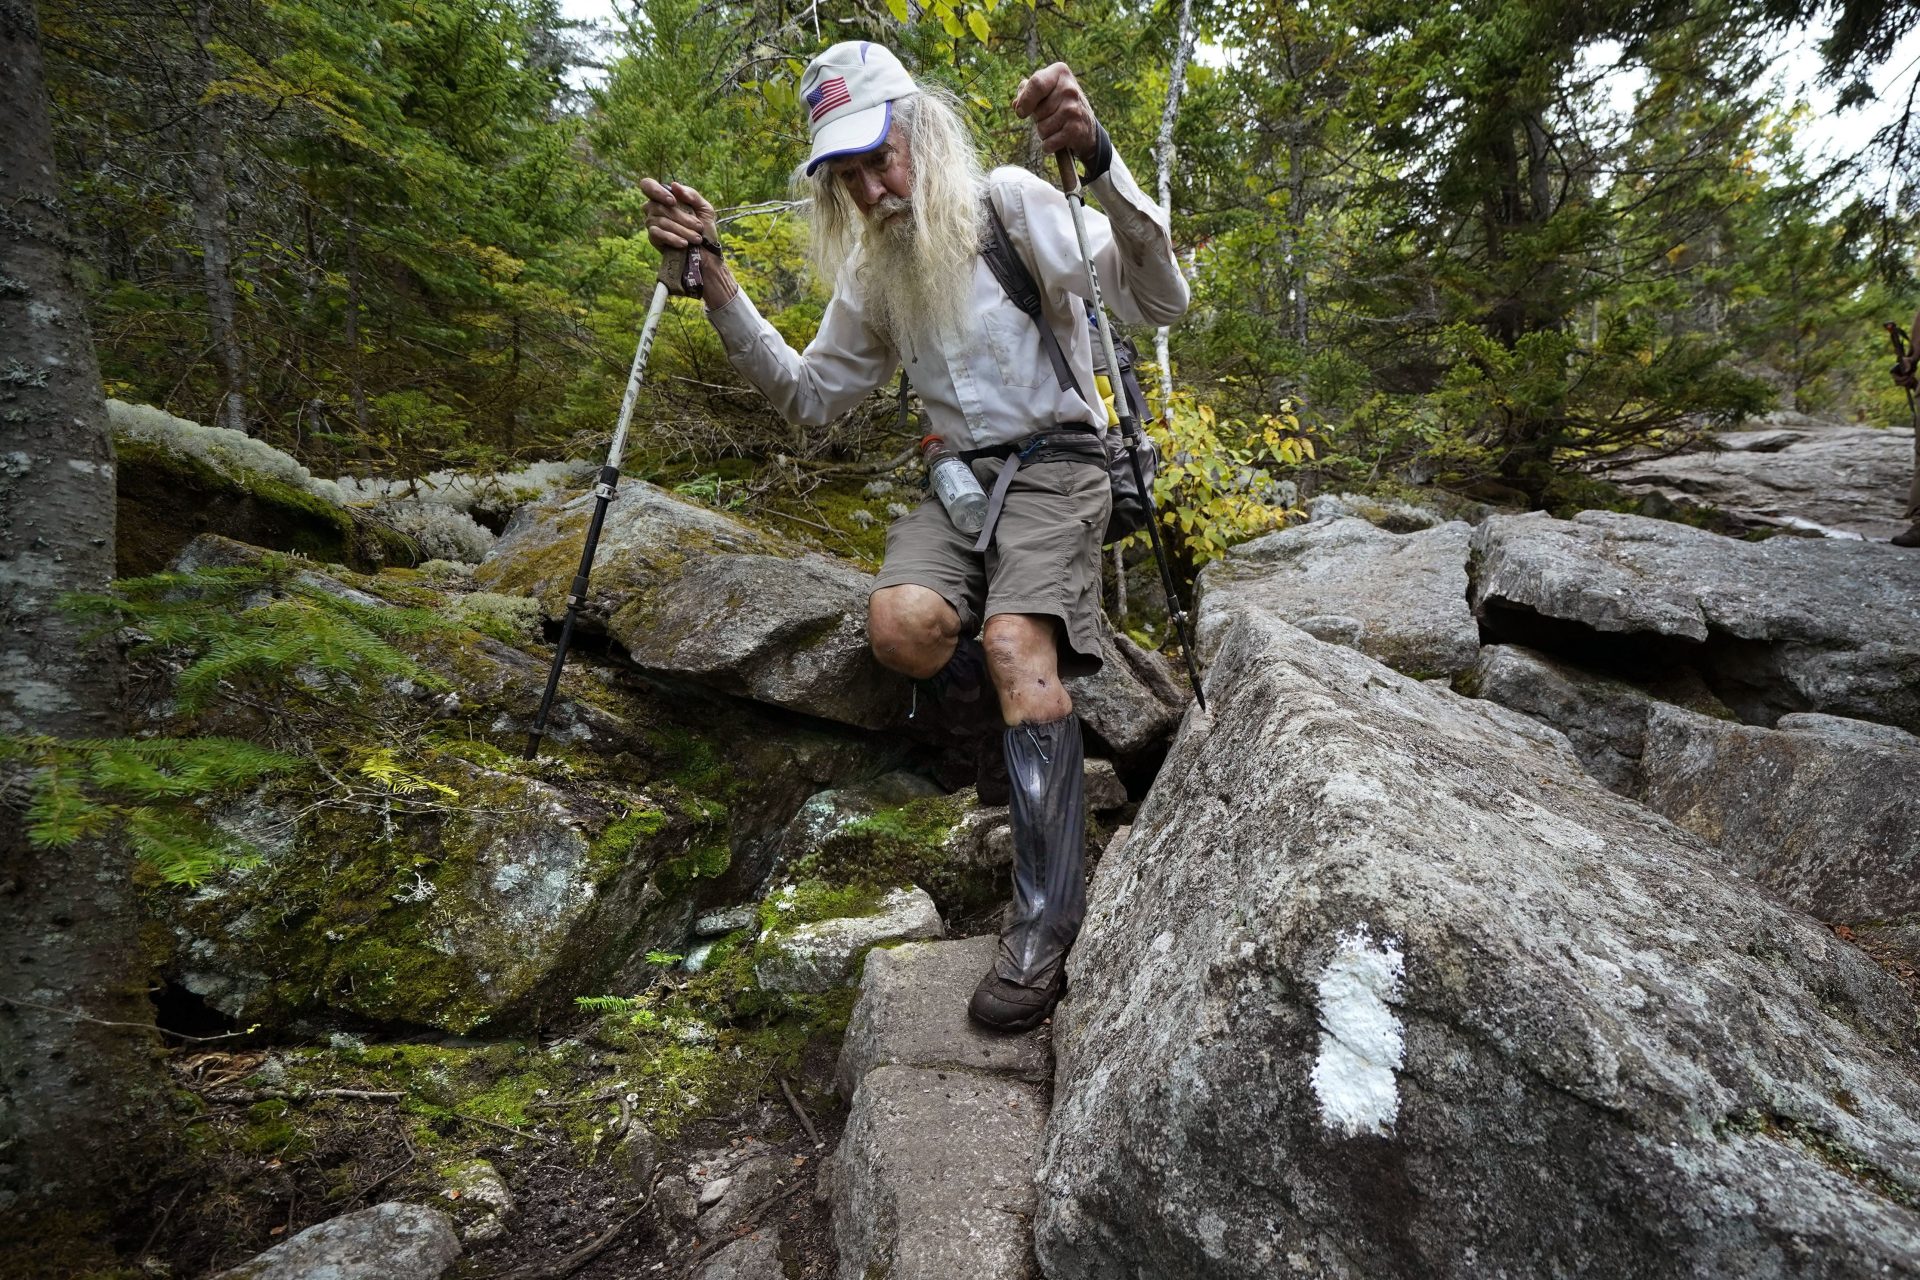 M.J. Eberhart, 83, carefully makes his way through large rocks while descending Mount Hayes on the Appalachian Trail, Sunday, Sept. 12, 2021, in Gorham, New Hampshire.